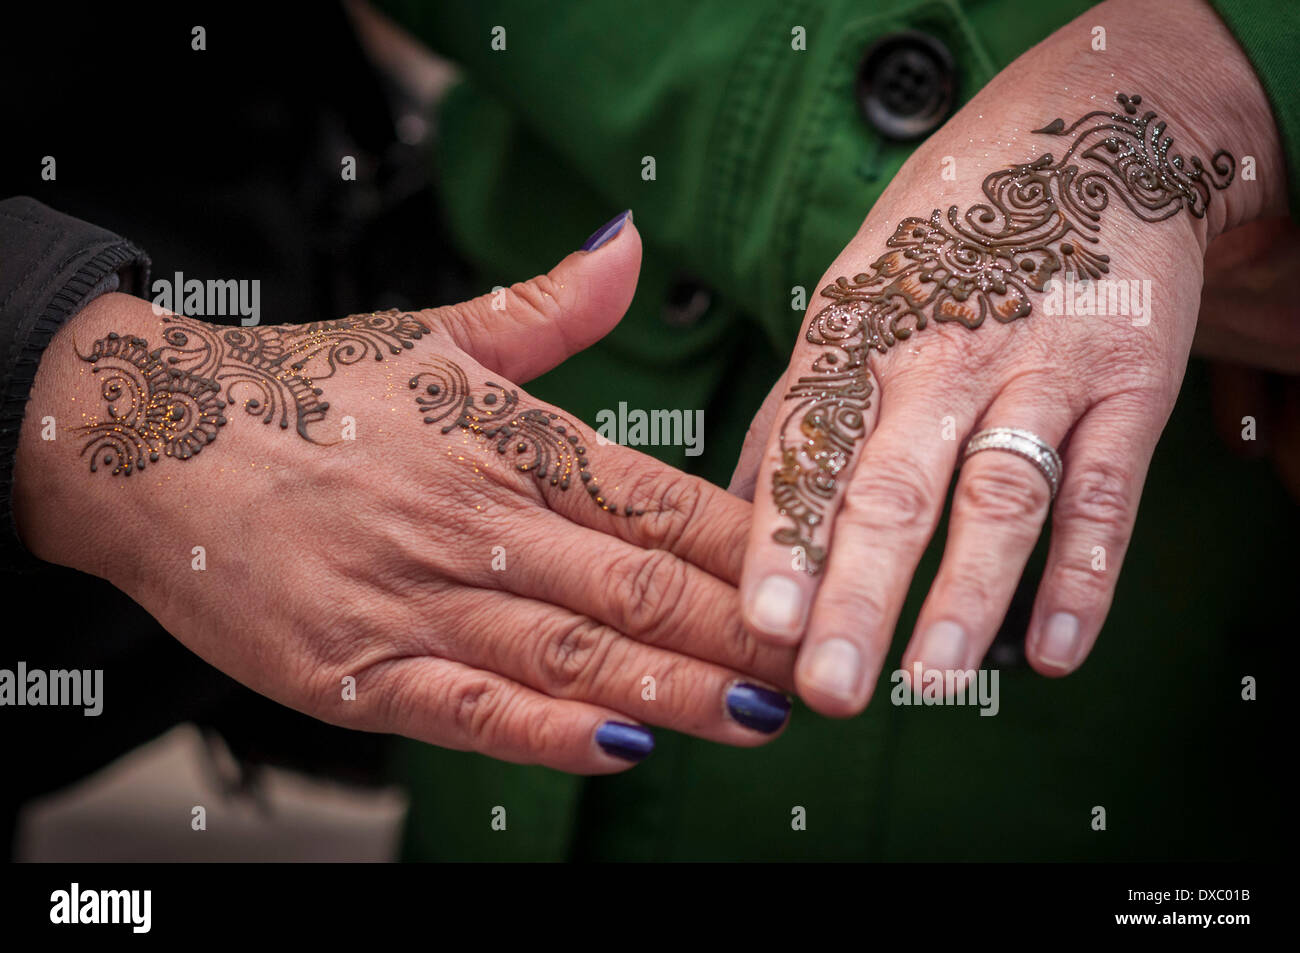 Brick Lane, London, UK, 23 March 2014.  Brick Lane hosts the Taste Brick Lane Awards 2014, to celebrate the cuisine of the area.  Two ladies show off their henna tattoos. Credit:  Stephen Chung/Alamy Live News Stock Photo